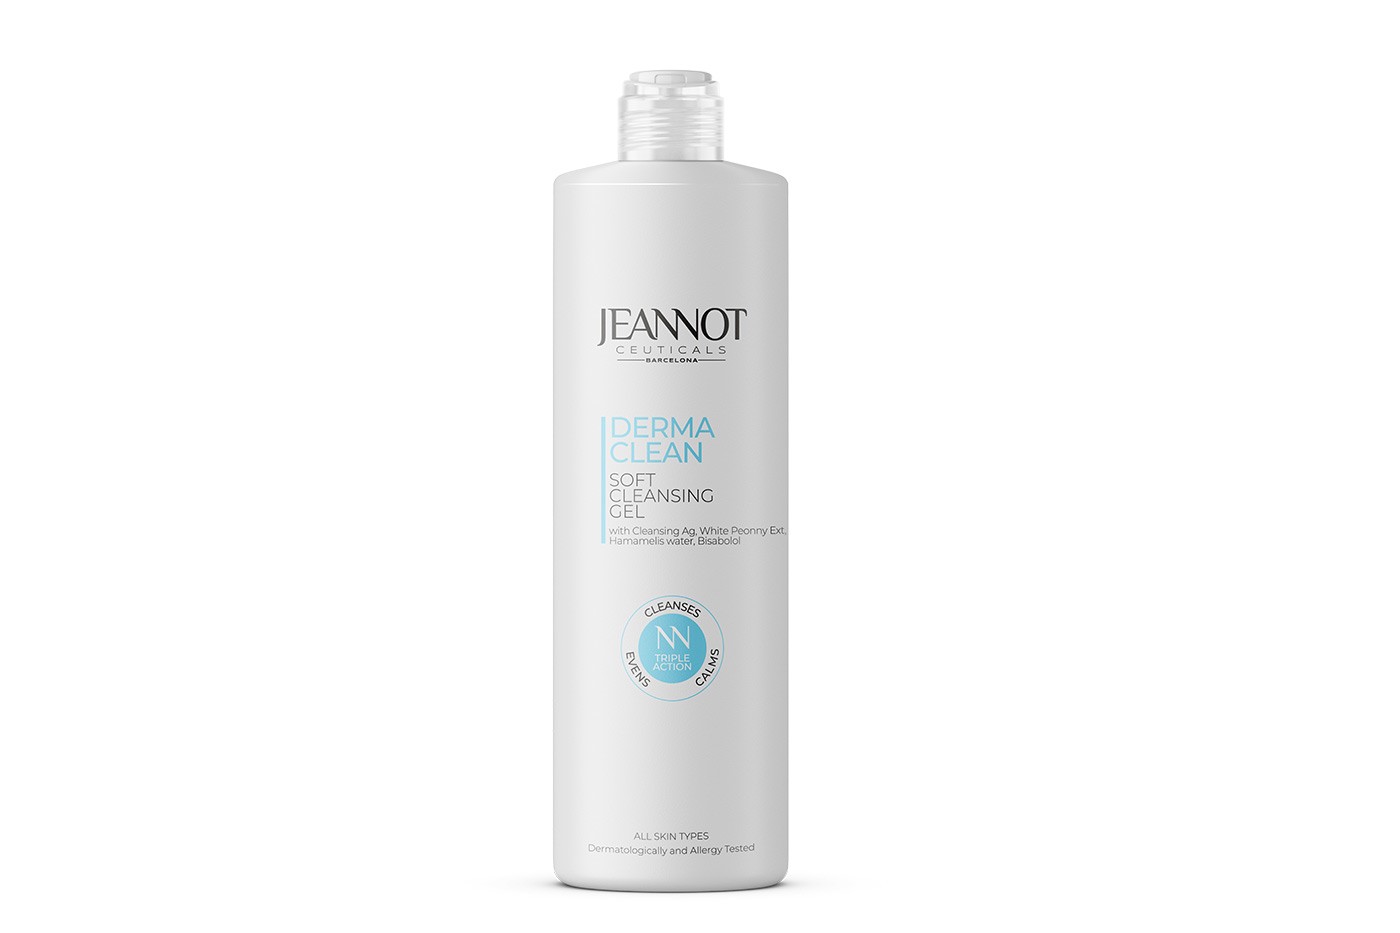 Normalize skin tone with Jeannot Ceuticals Soft Cleansing Gel